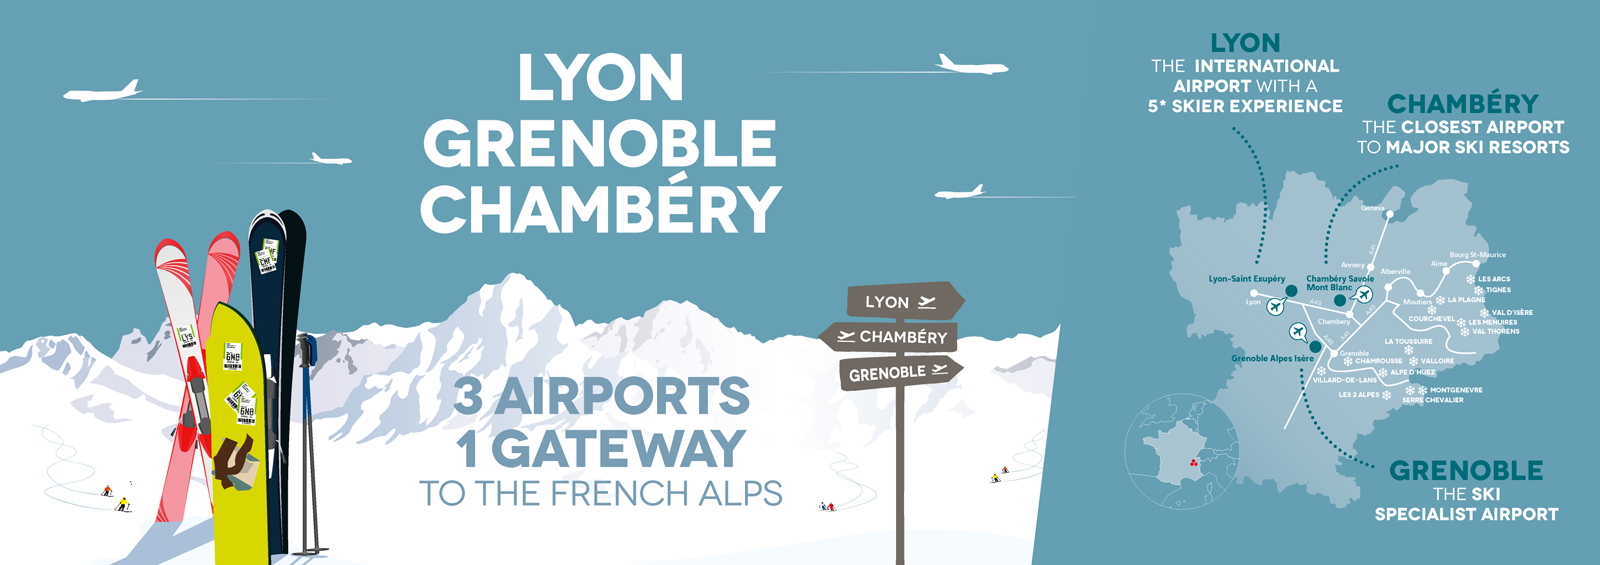 Chambéry, Grenoble and Lyon aiports - Book now your next flight and shuttle to the French Alps Ski Resorts